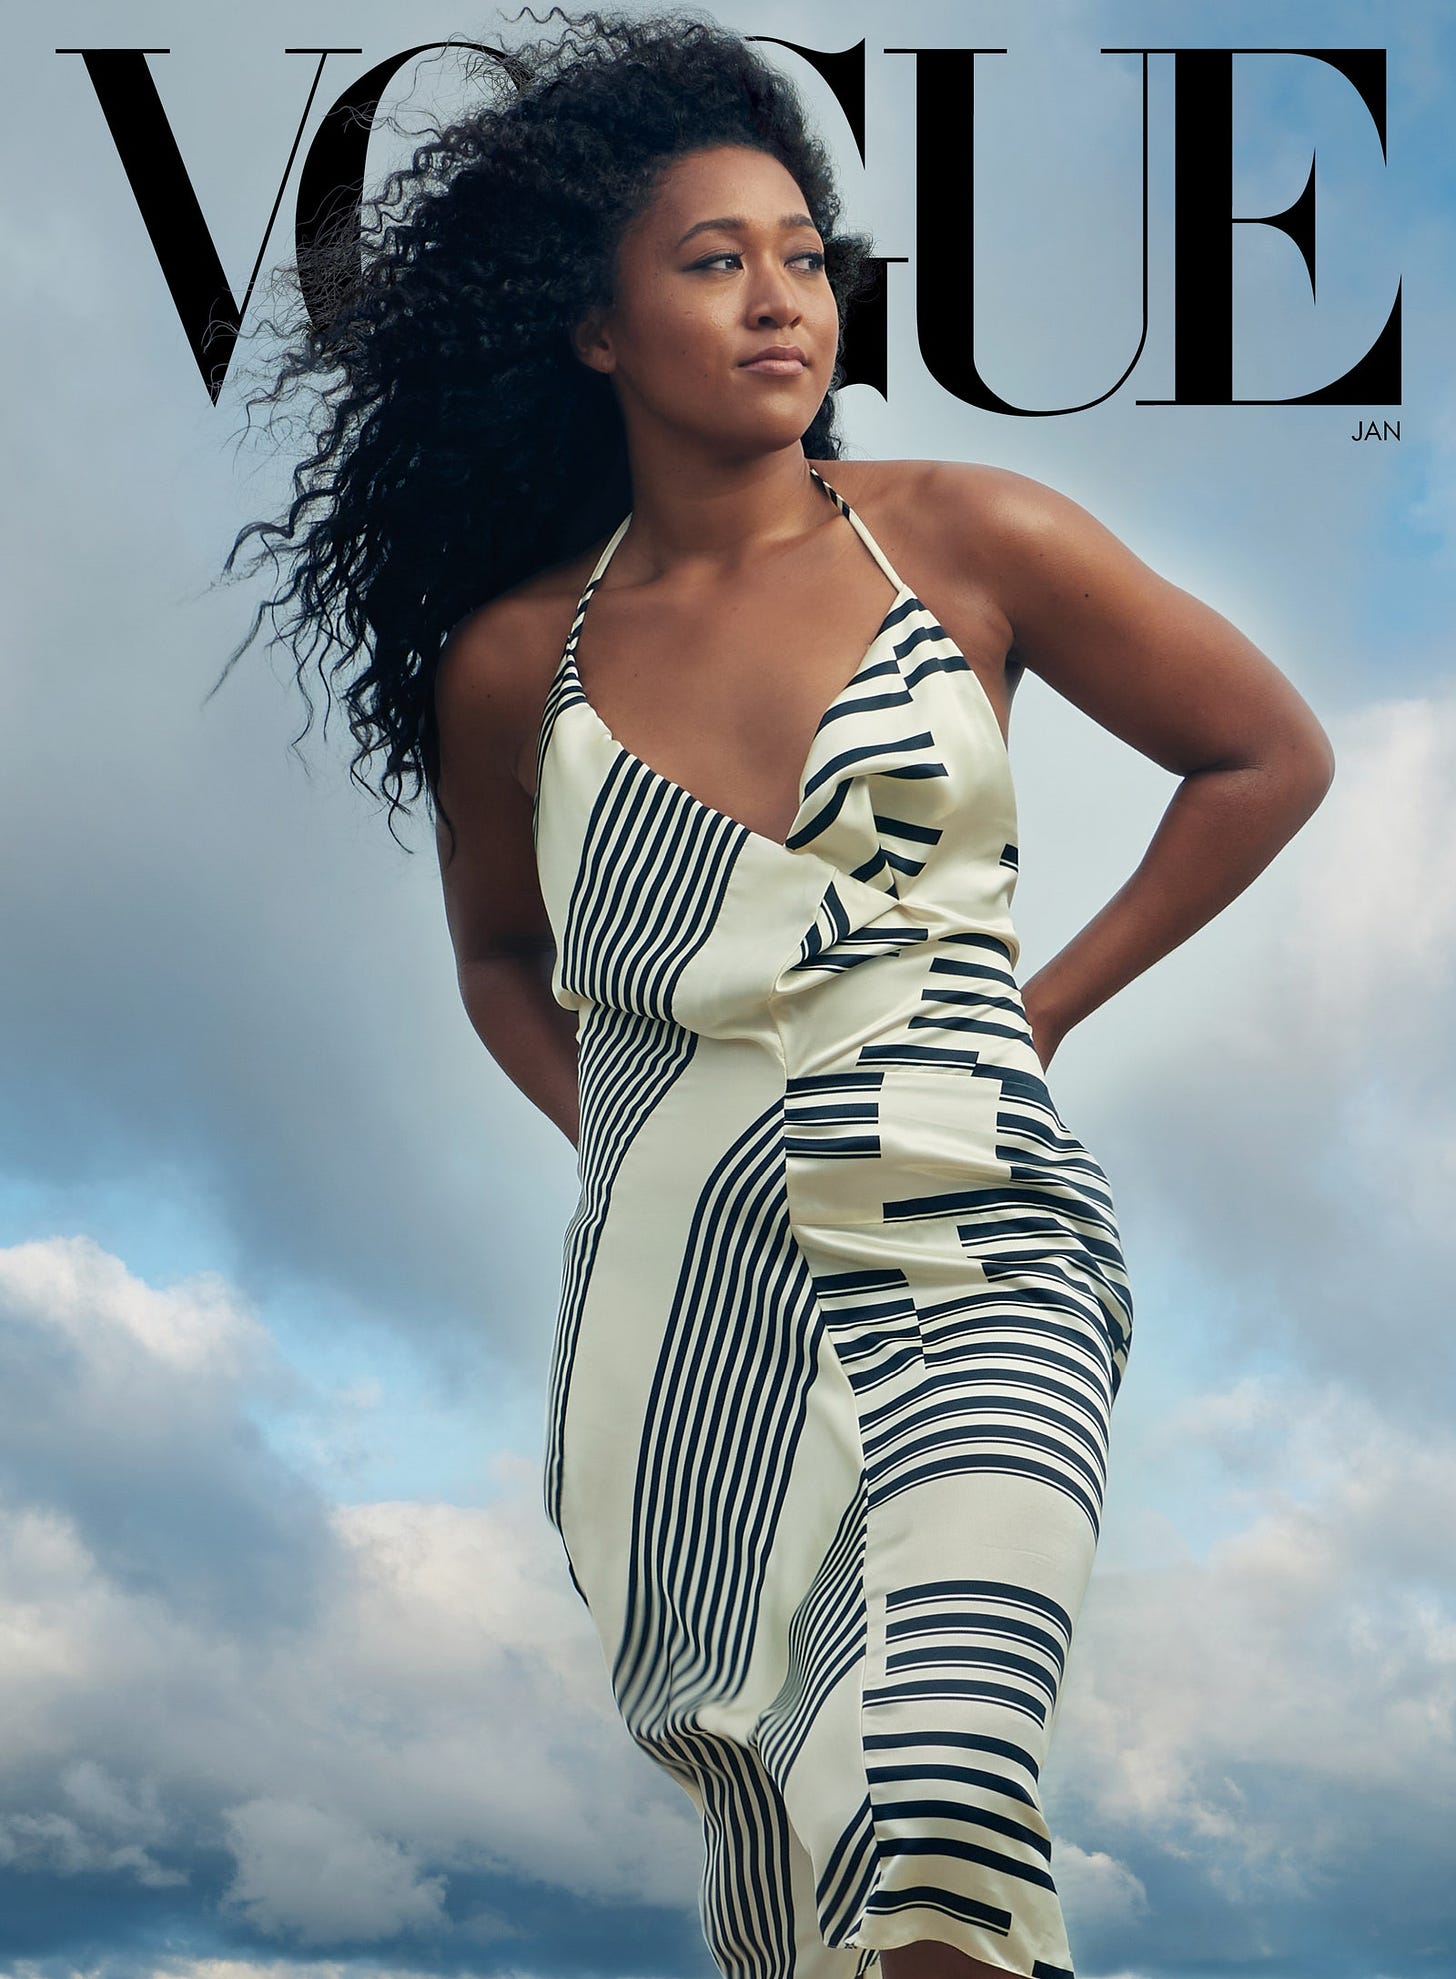 Leading By Example: How Naomi Osaka Became the People's Champion | Vogue